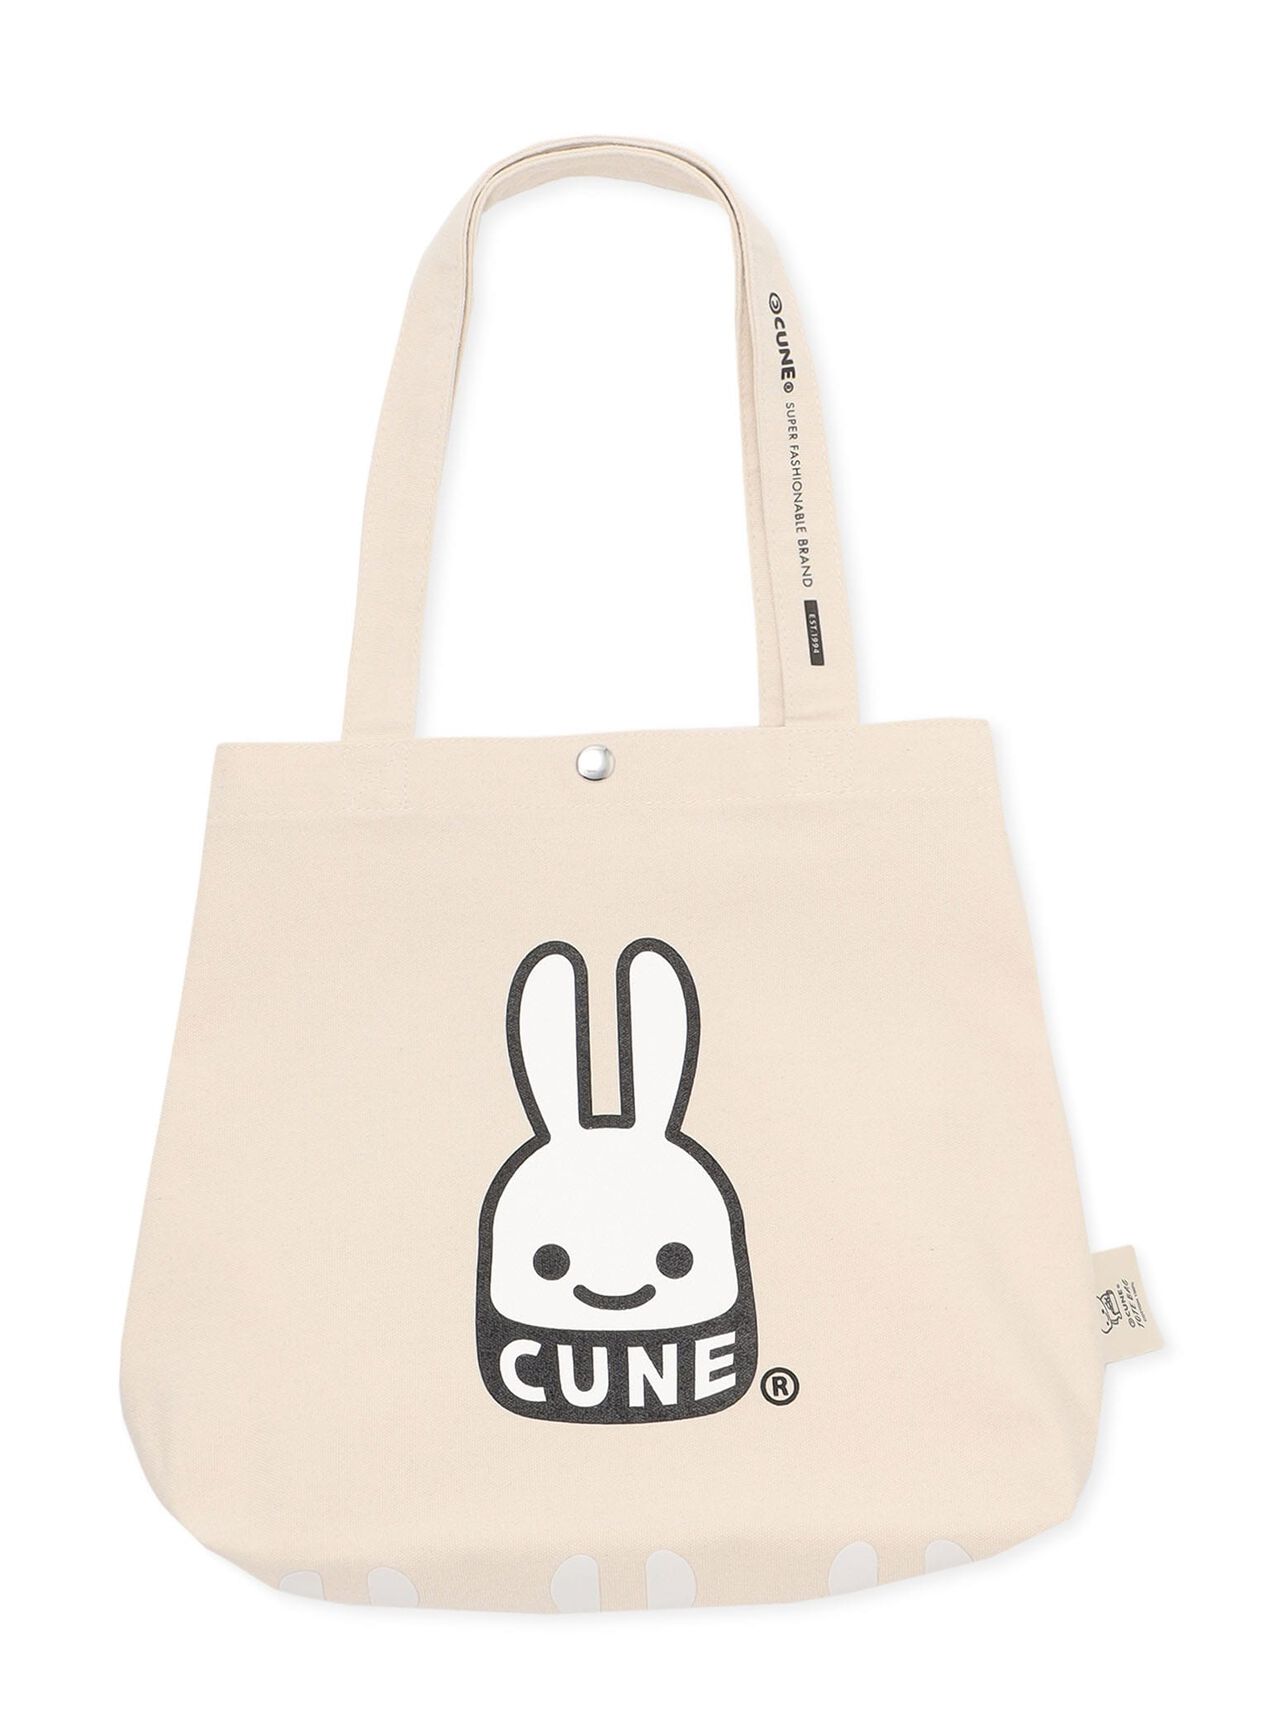 Basic Cotton Tote Bag CUNE Rabbit,ONE, large image number 2